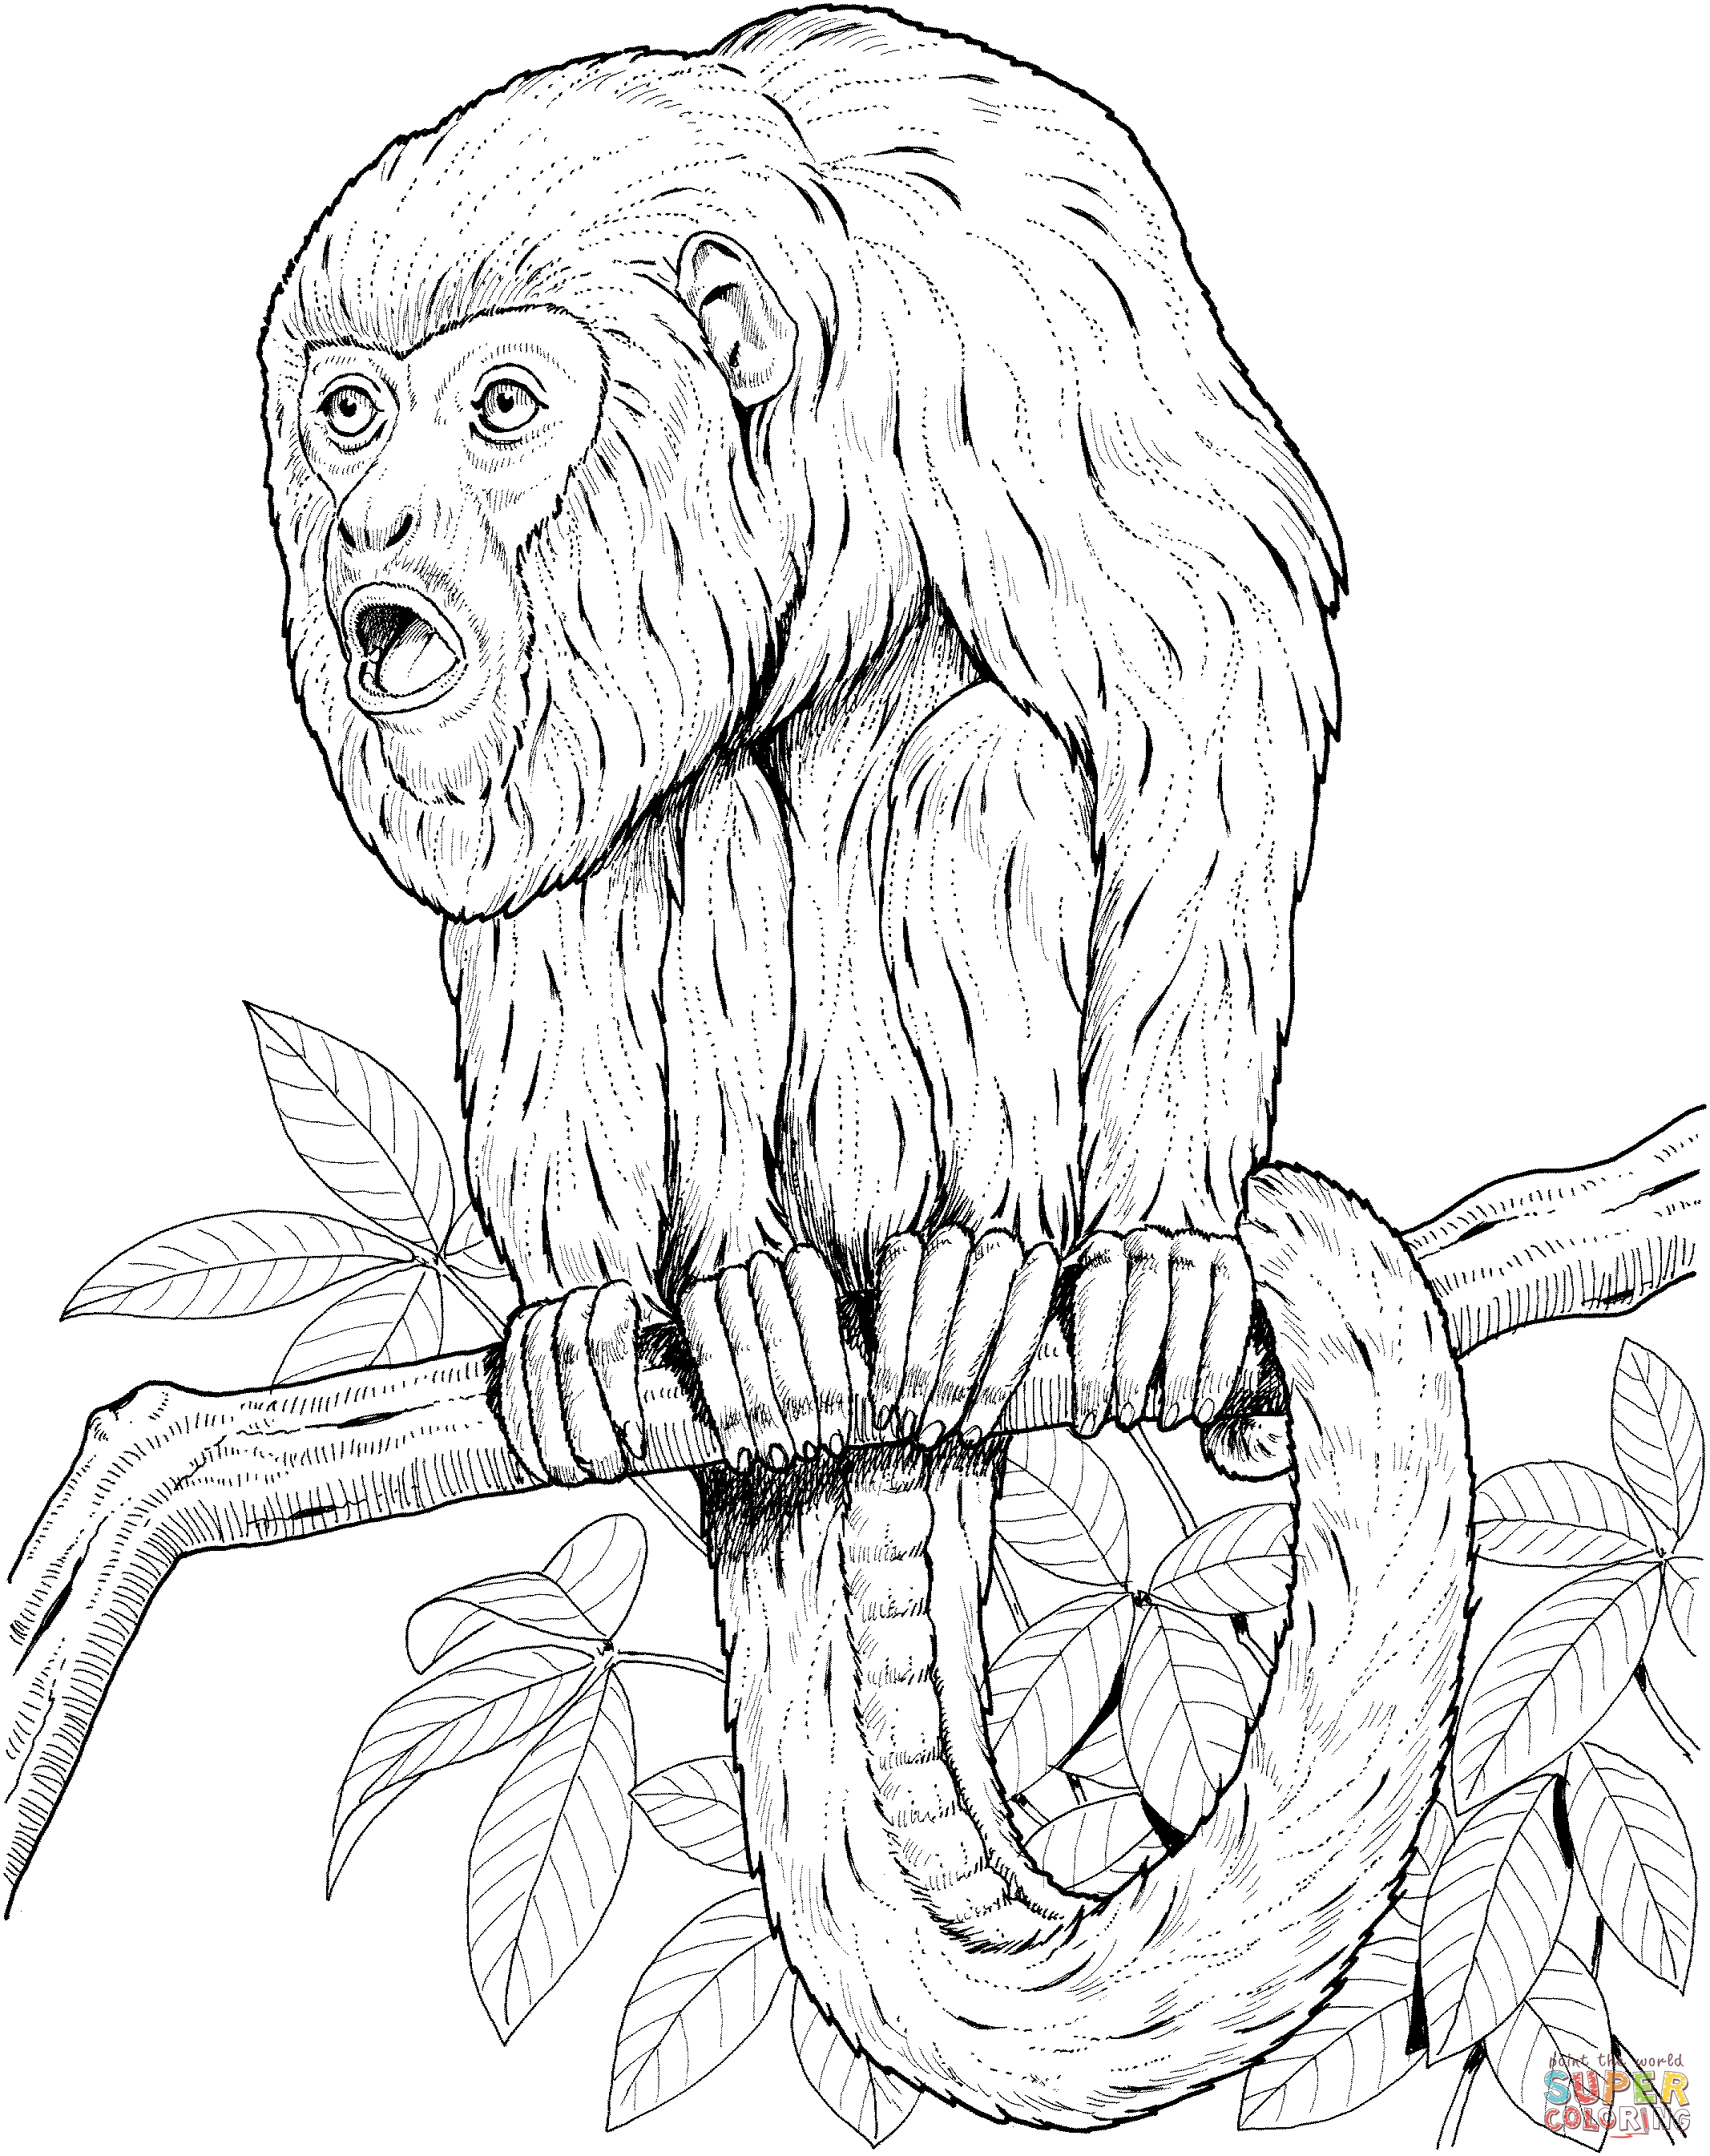 Howler Monkey coloring page | Free Printable Coloring Pages